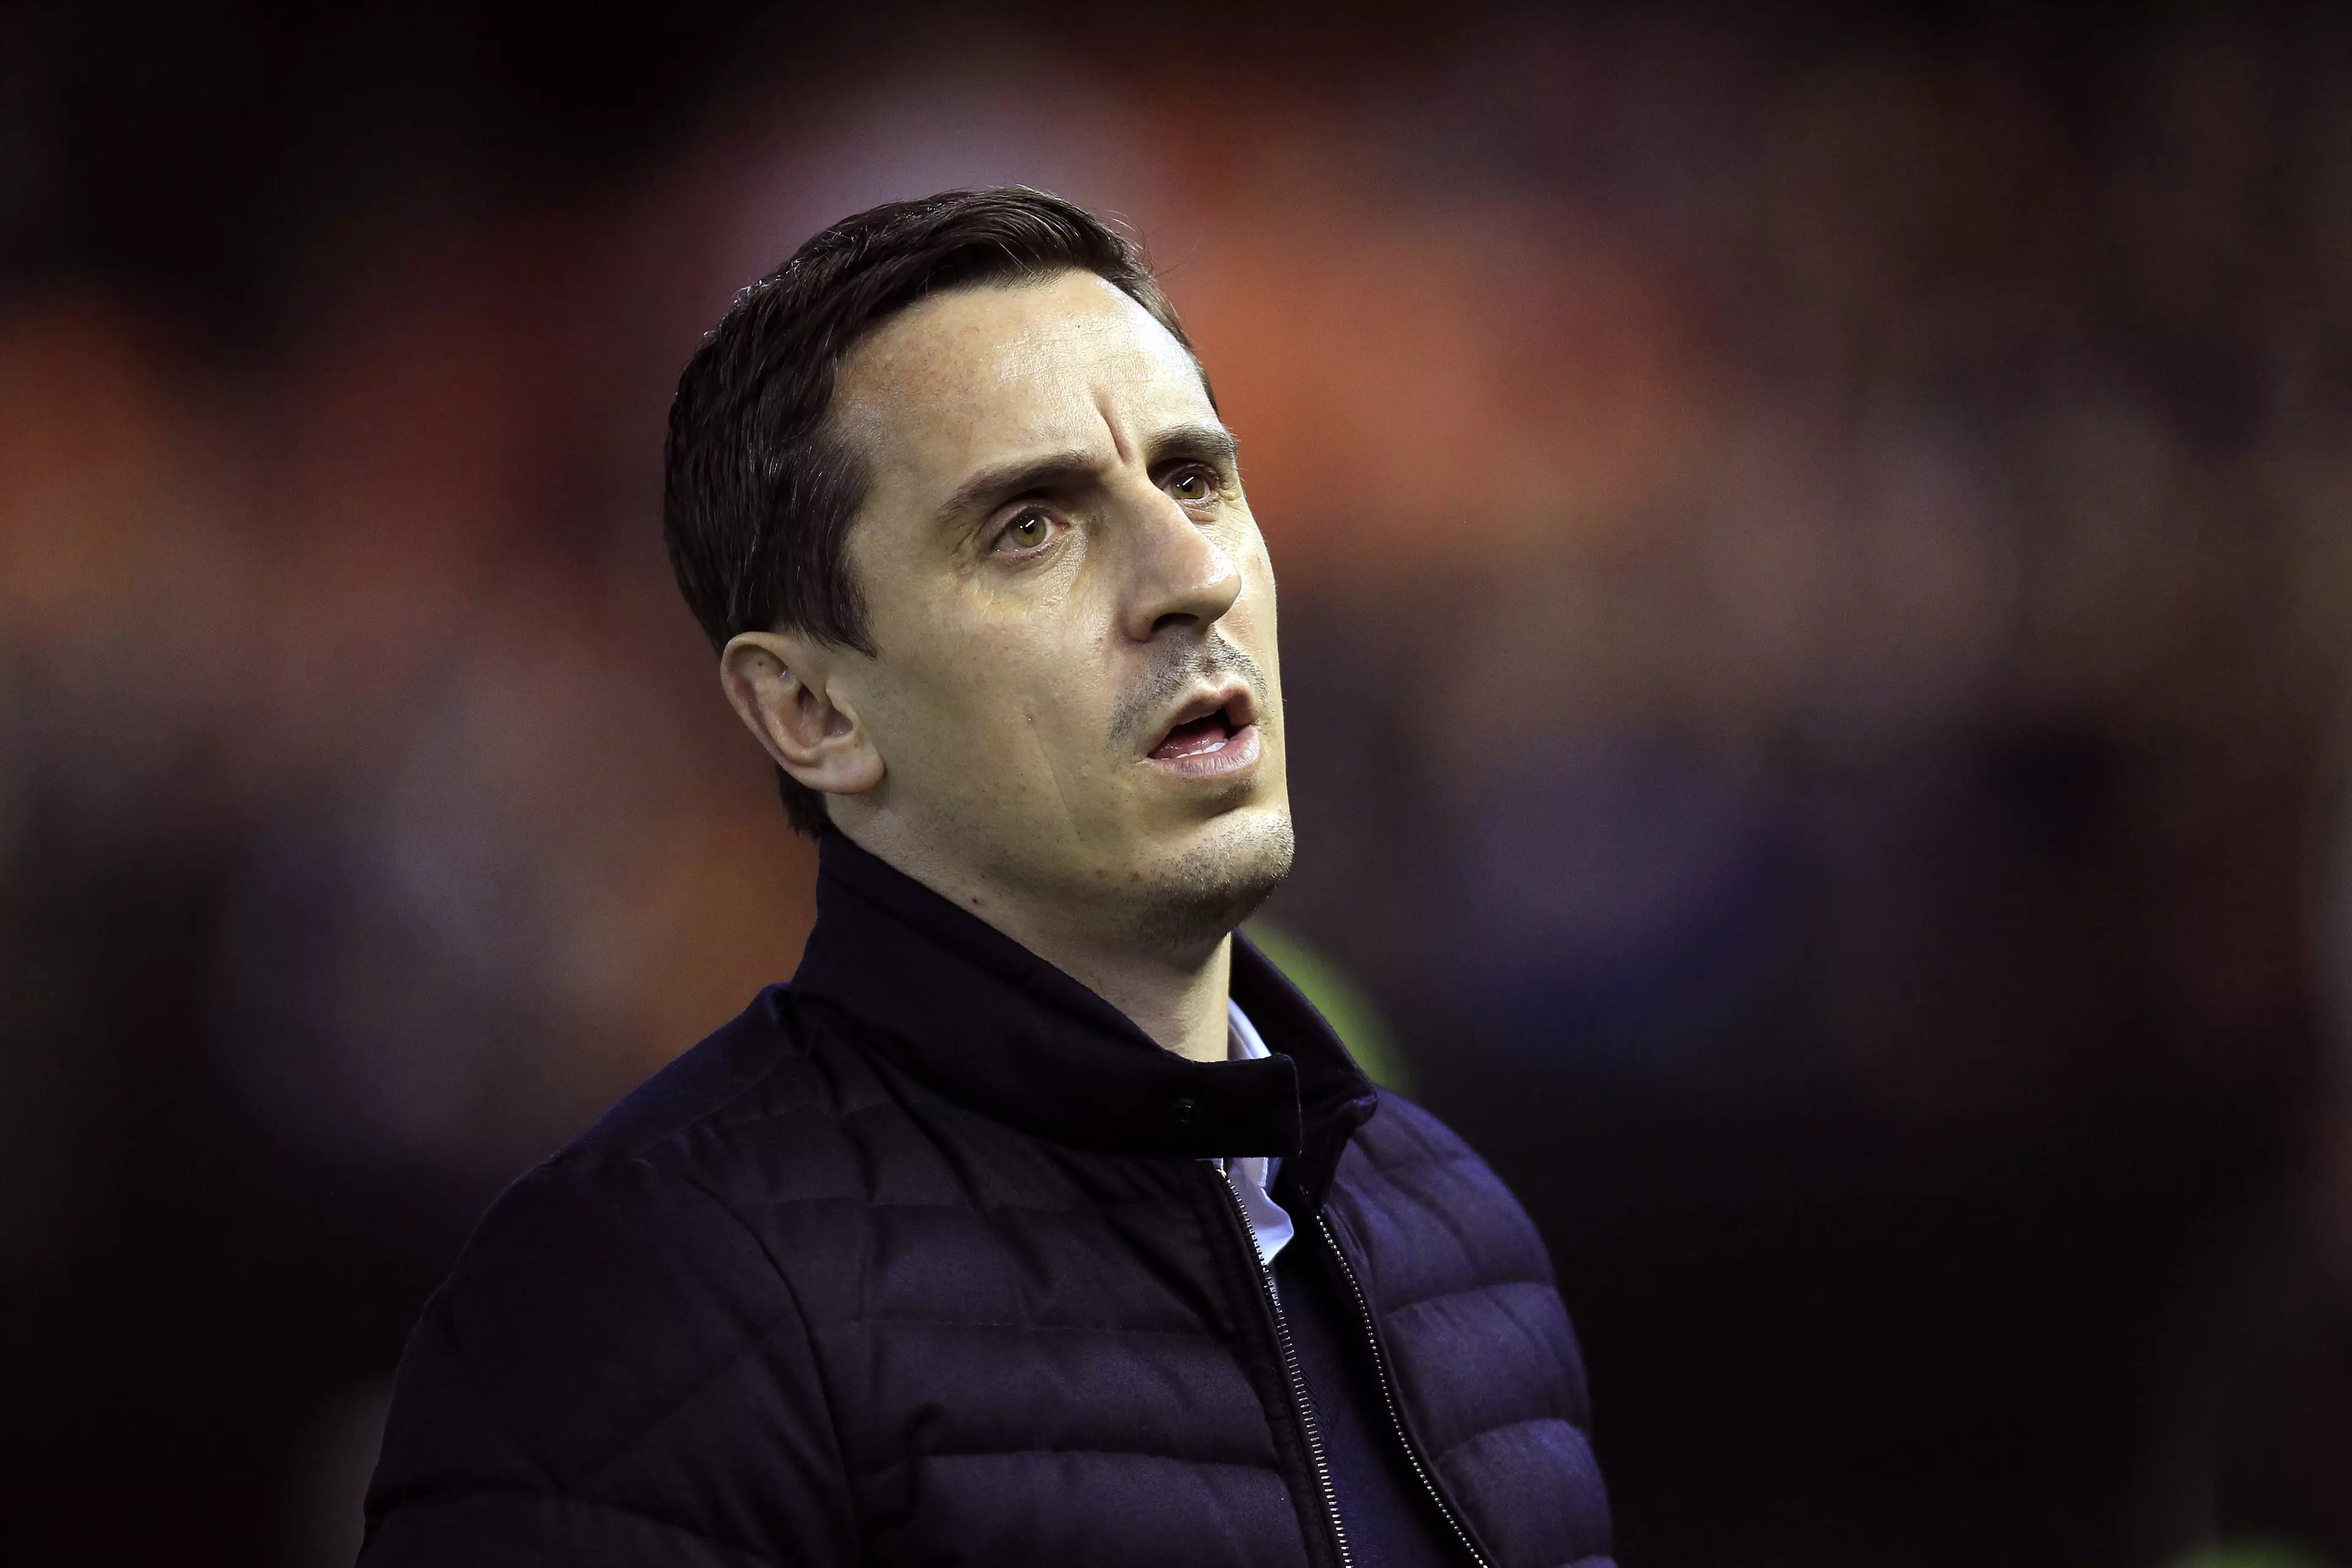 Gary Neville Hits Back At Luka Modric's Crictism Of England With Brilliant Tweet